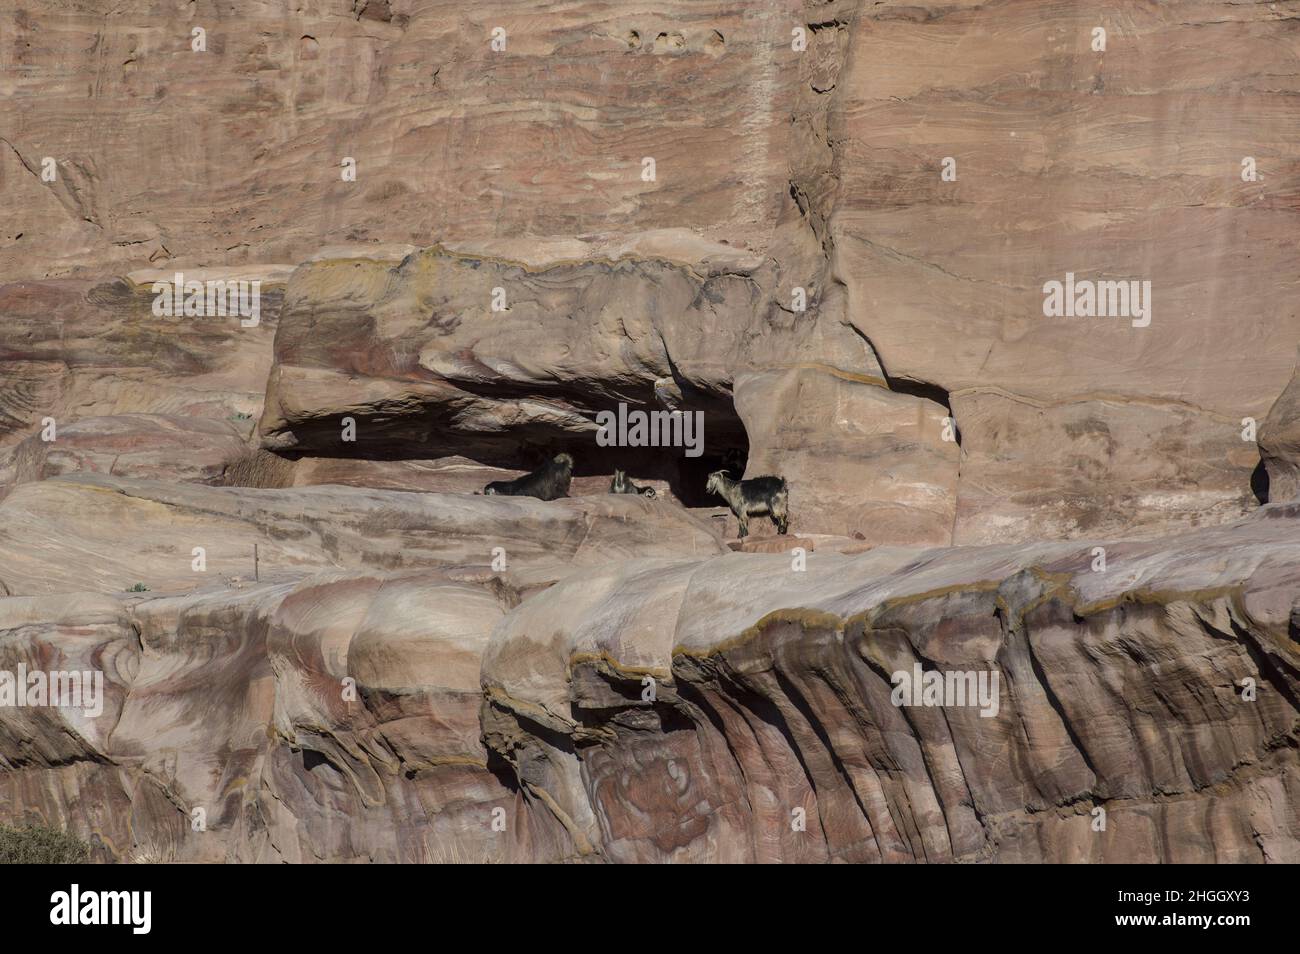 Mountain goats in Petra, Jordan, with canyons, caves, desert landscape and buildings carved by the Nabateans later changed by the conquering Romans Stock Photo